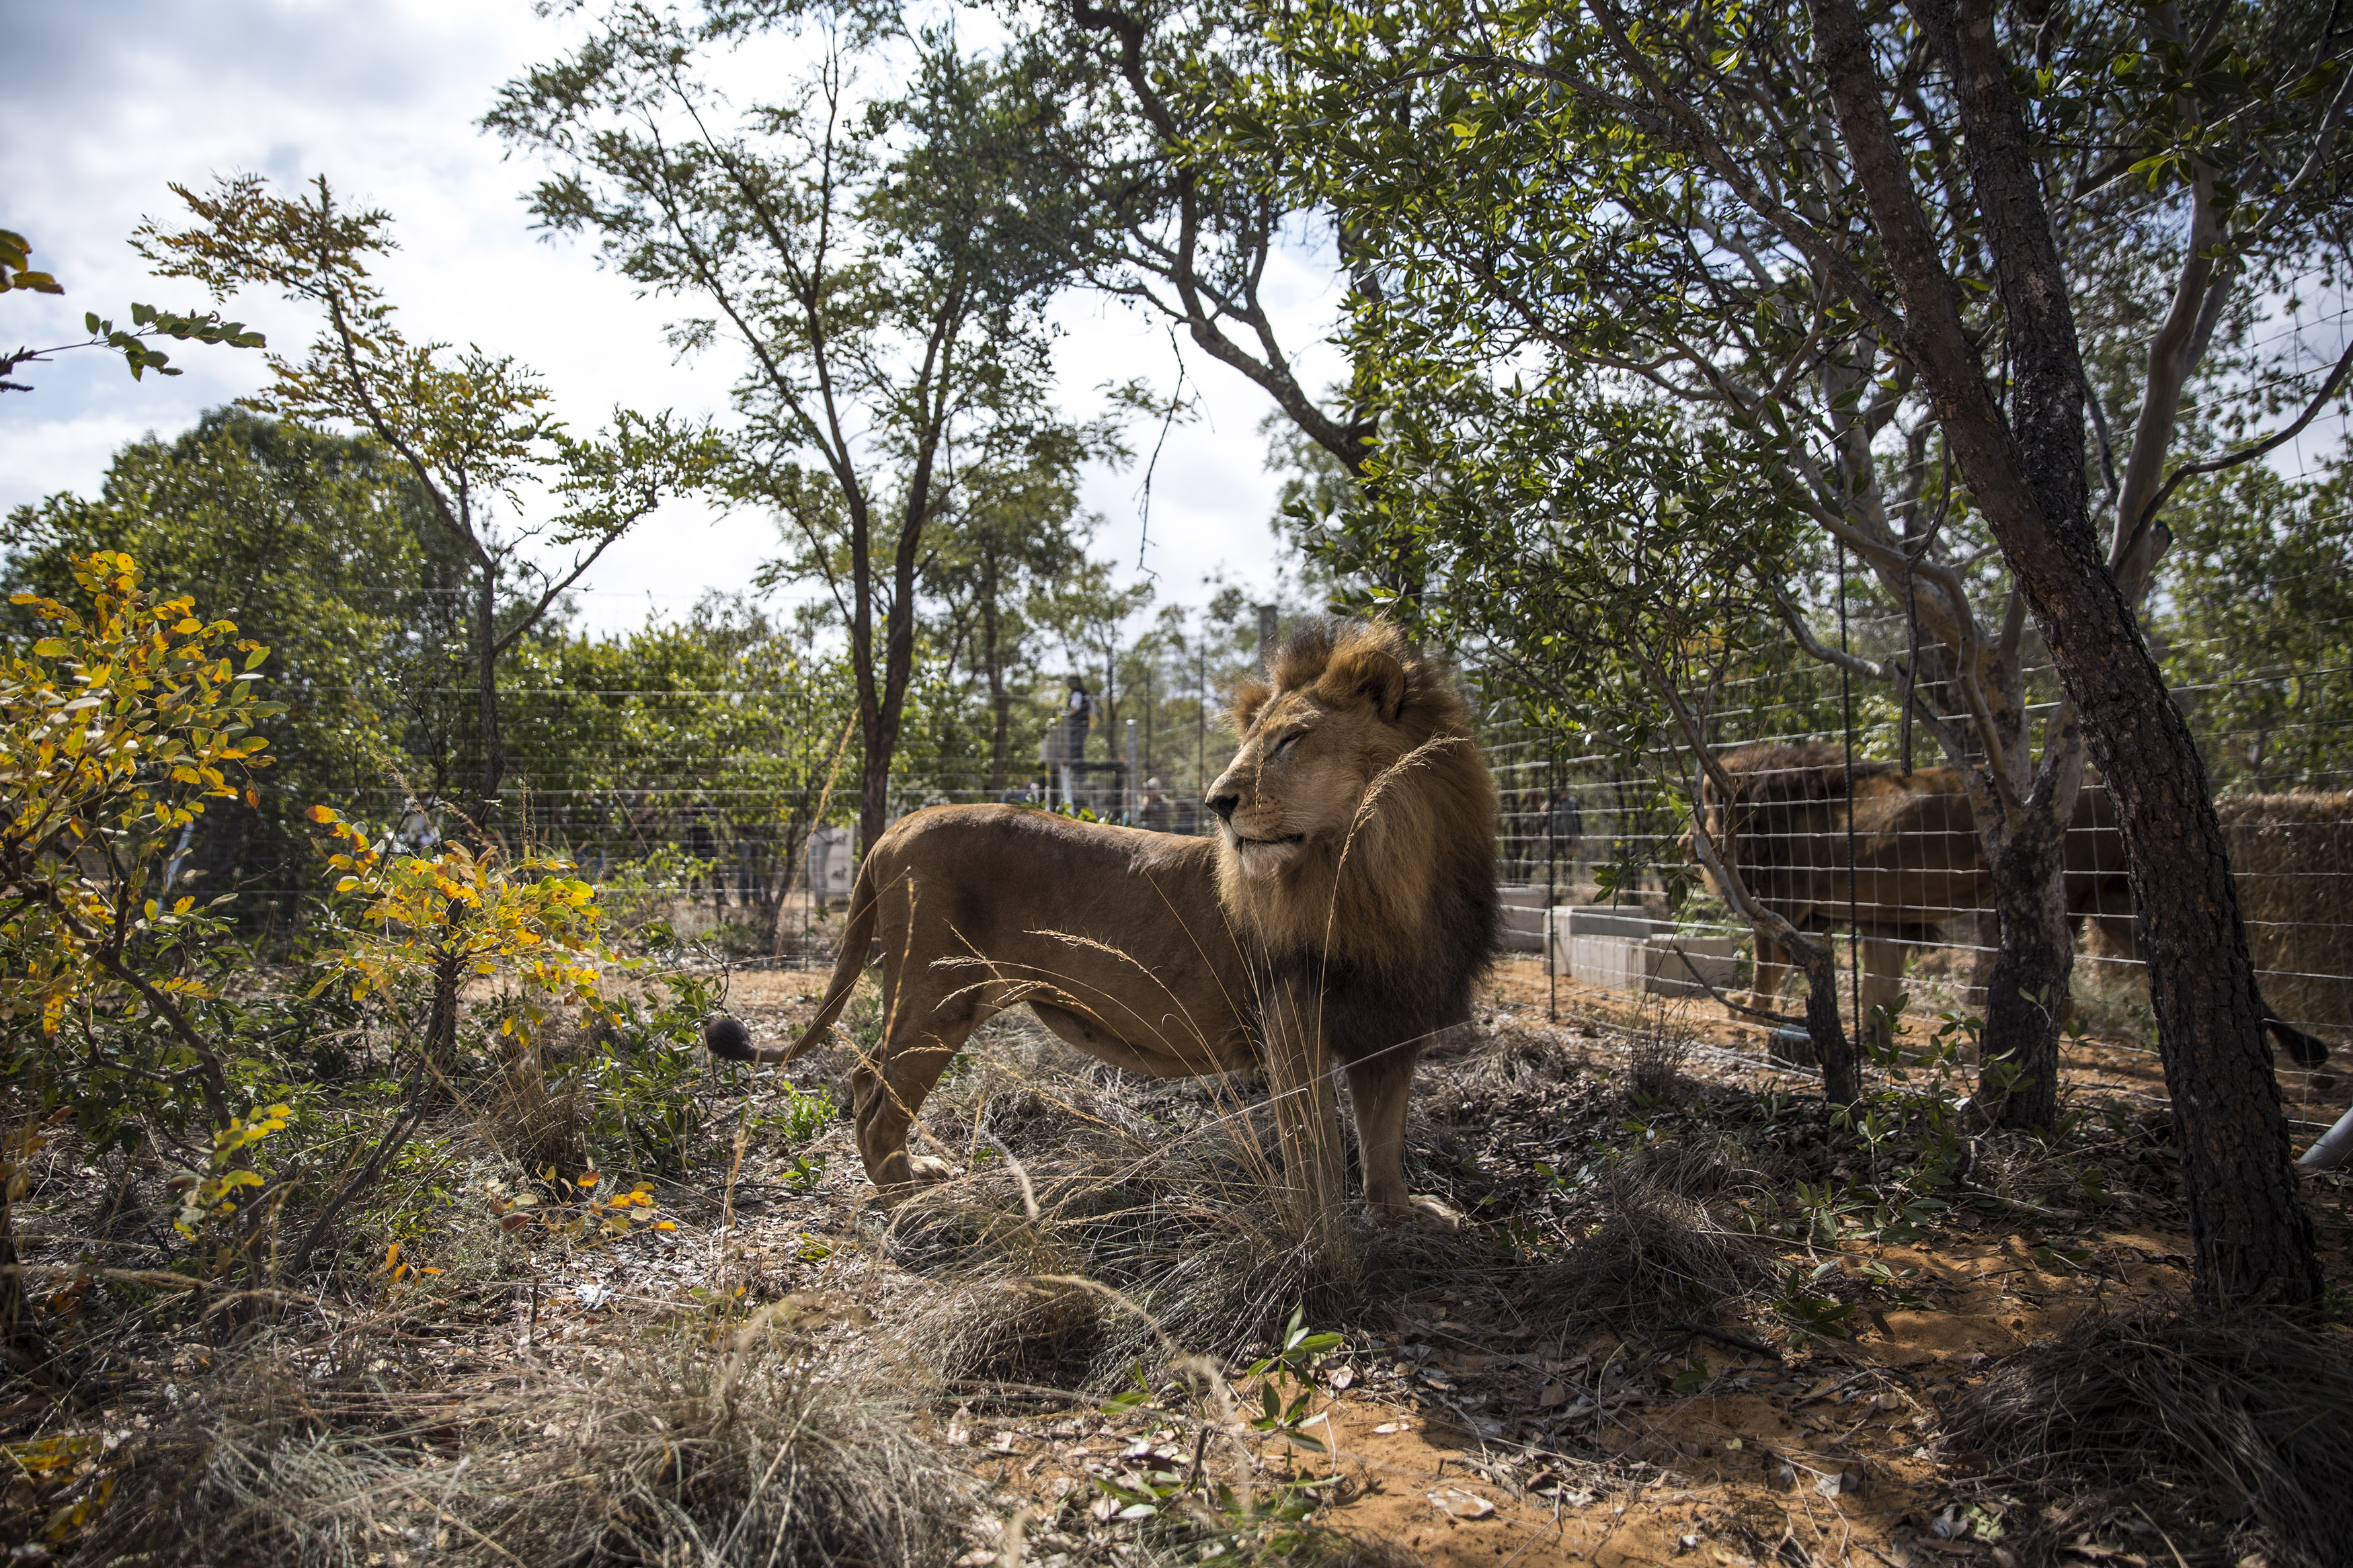 One of the 33 Lions enjoys his new enclosure at the Emoya  Big Cat Sanctuary', on May 01, 2016 in Vaalwater, South Africa. A total of 33 former circus Lions, 22 males and 11 females from Peru and Columbia were airlifted to South Africa yesterday, before being released today to live out their lives on the private reserve in the Limpopo Province. 24 of the animals were rescued in raids on circuses operating in Peru, with the rest voluntarily surrendered by a circus in Colombia after Colombias Congress passed a bill prohibiting circuses from using wild animals. (Photograph by Dan Kitwood—Getty)